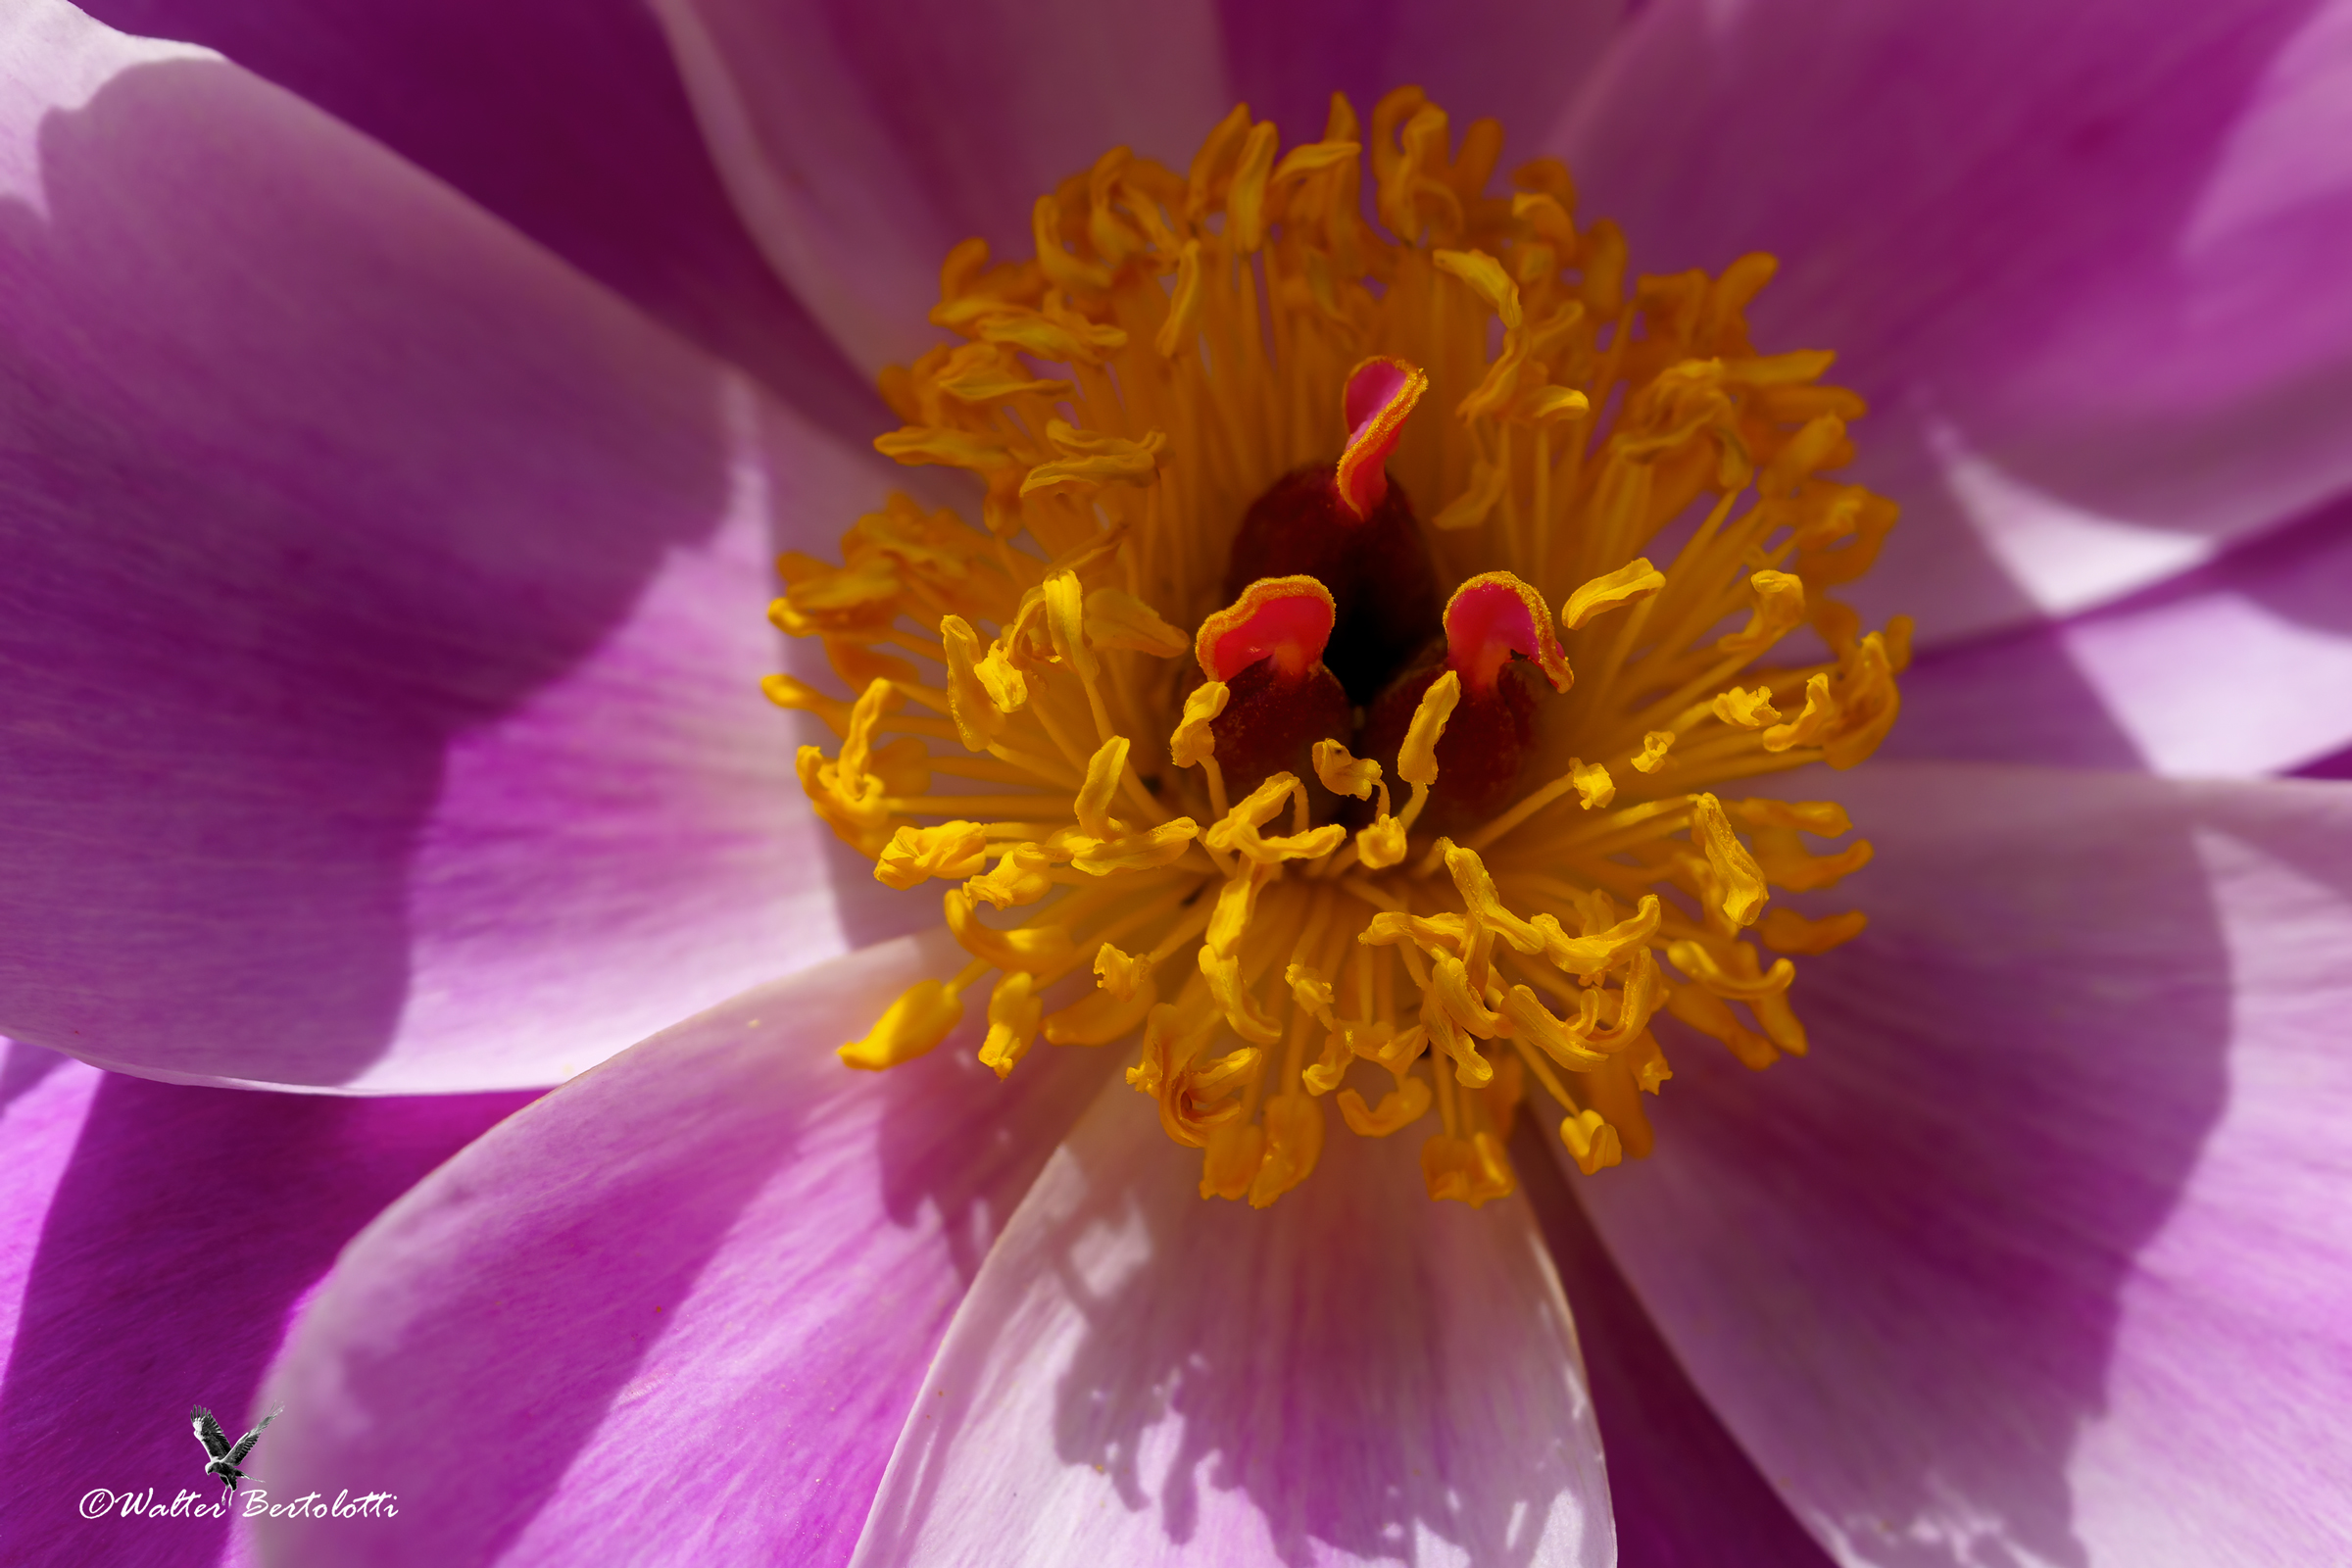 the heart of the peony...